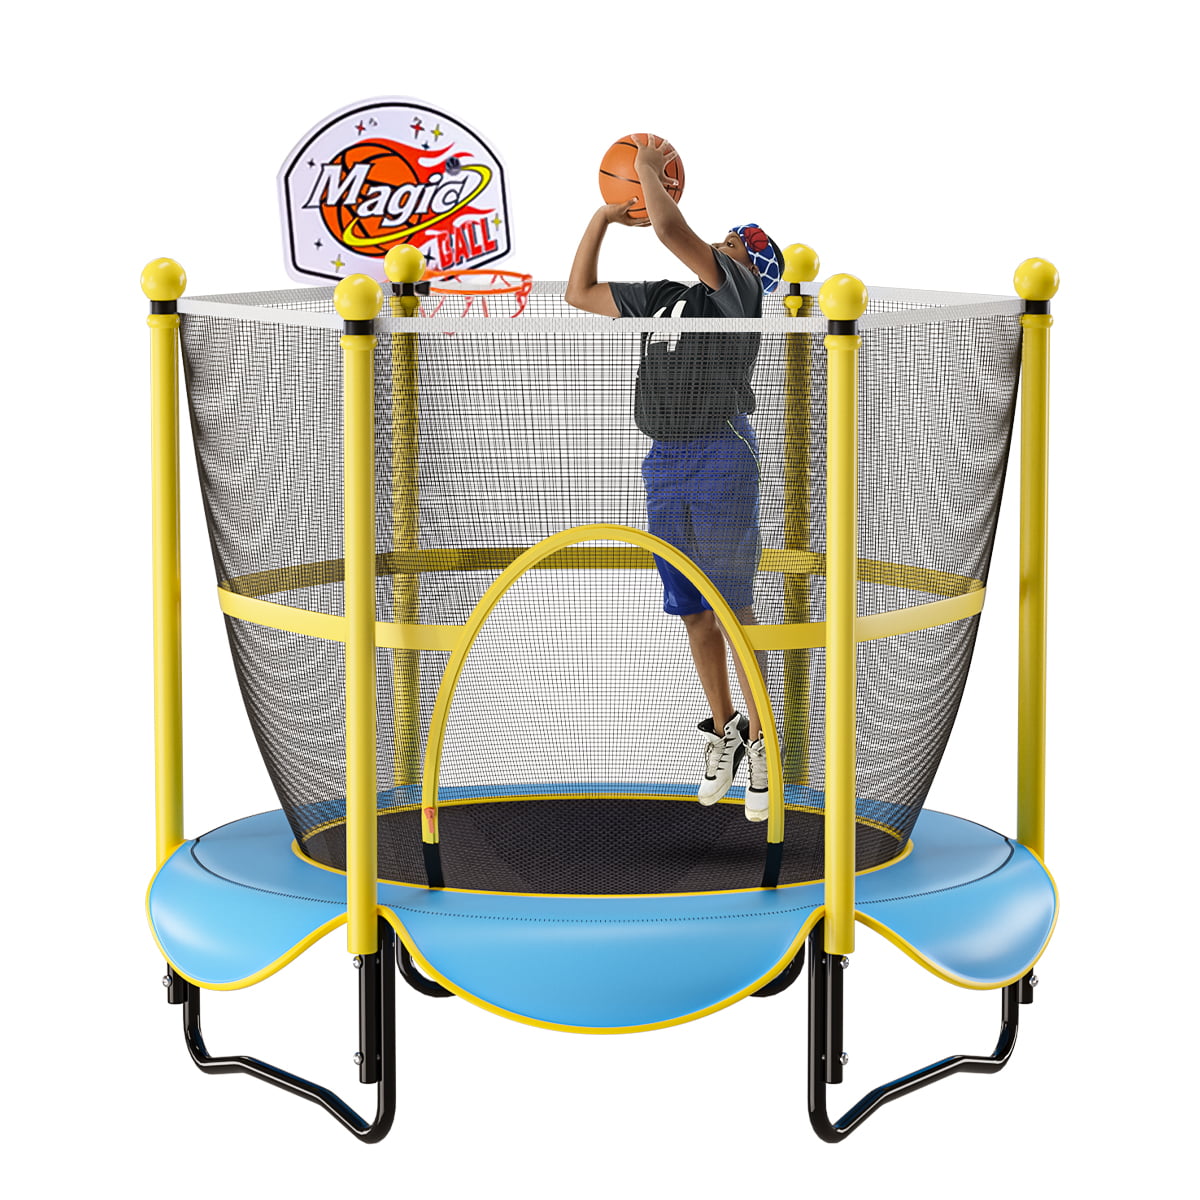 A,US in Stock BOLUOYI 5FT Kids Trampoline with Safety Enclosure Net Jumping Mat and Spring Cover Padding Indoor Outdoor Yard Trampolines for Children 